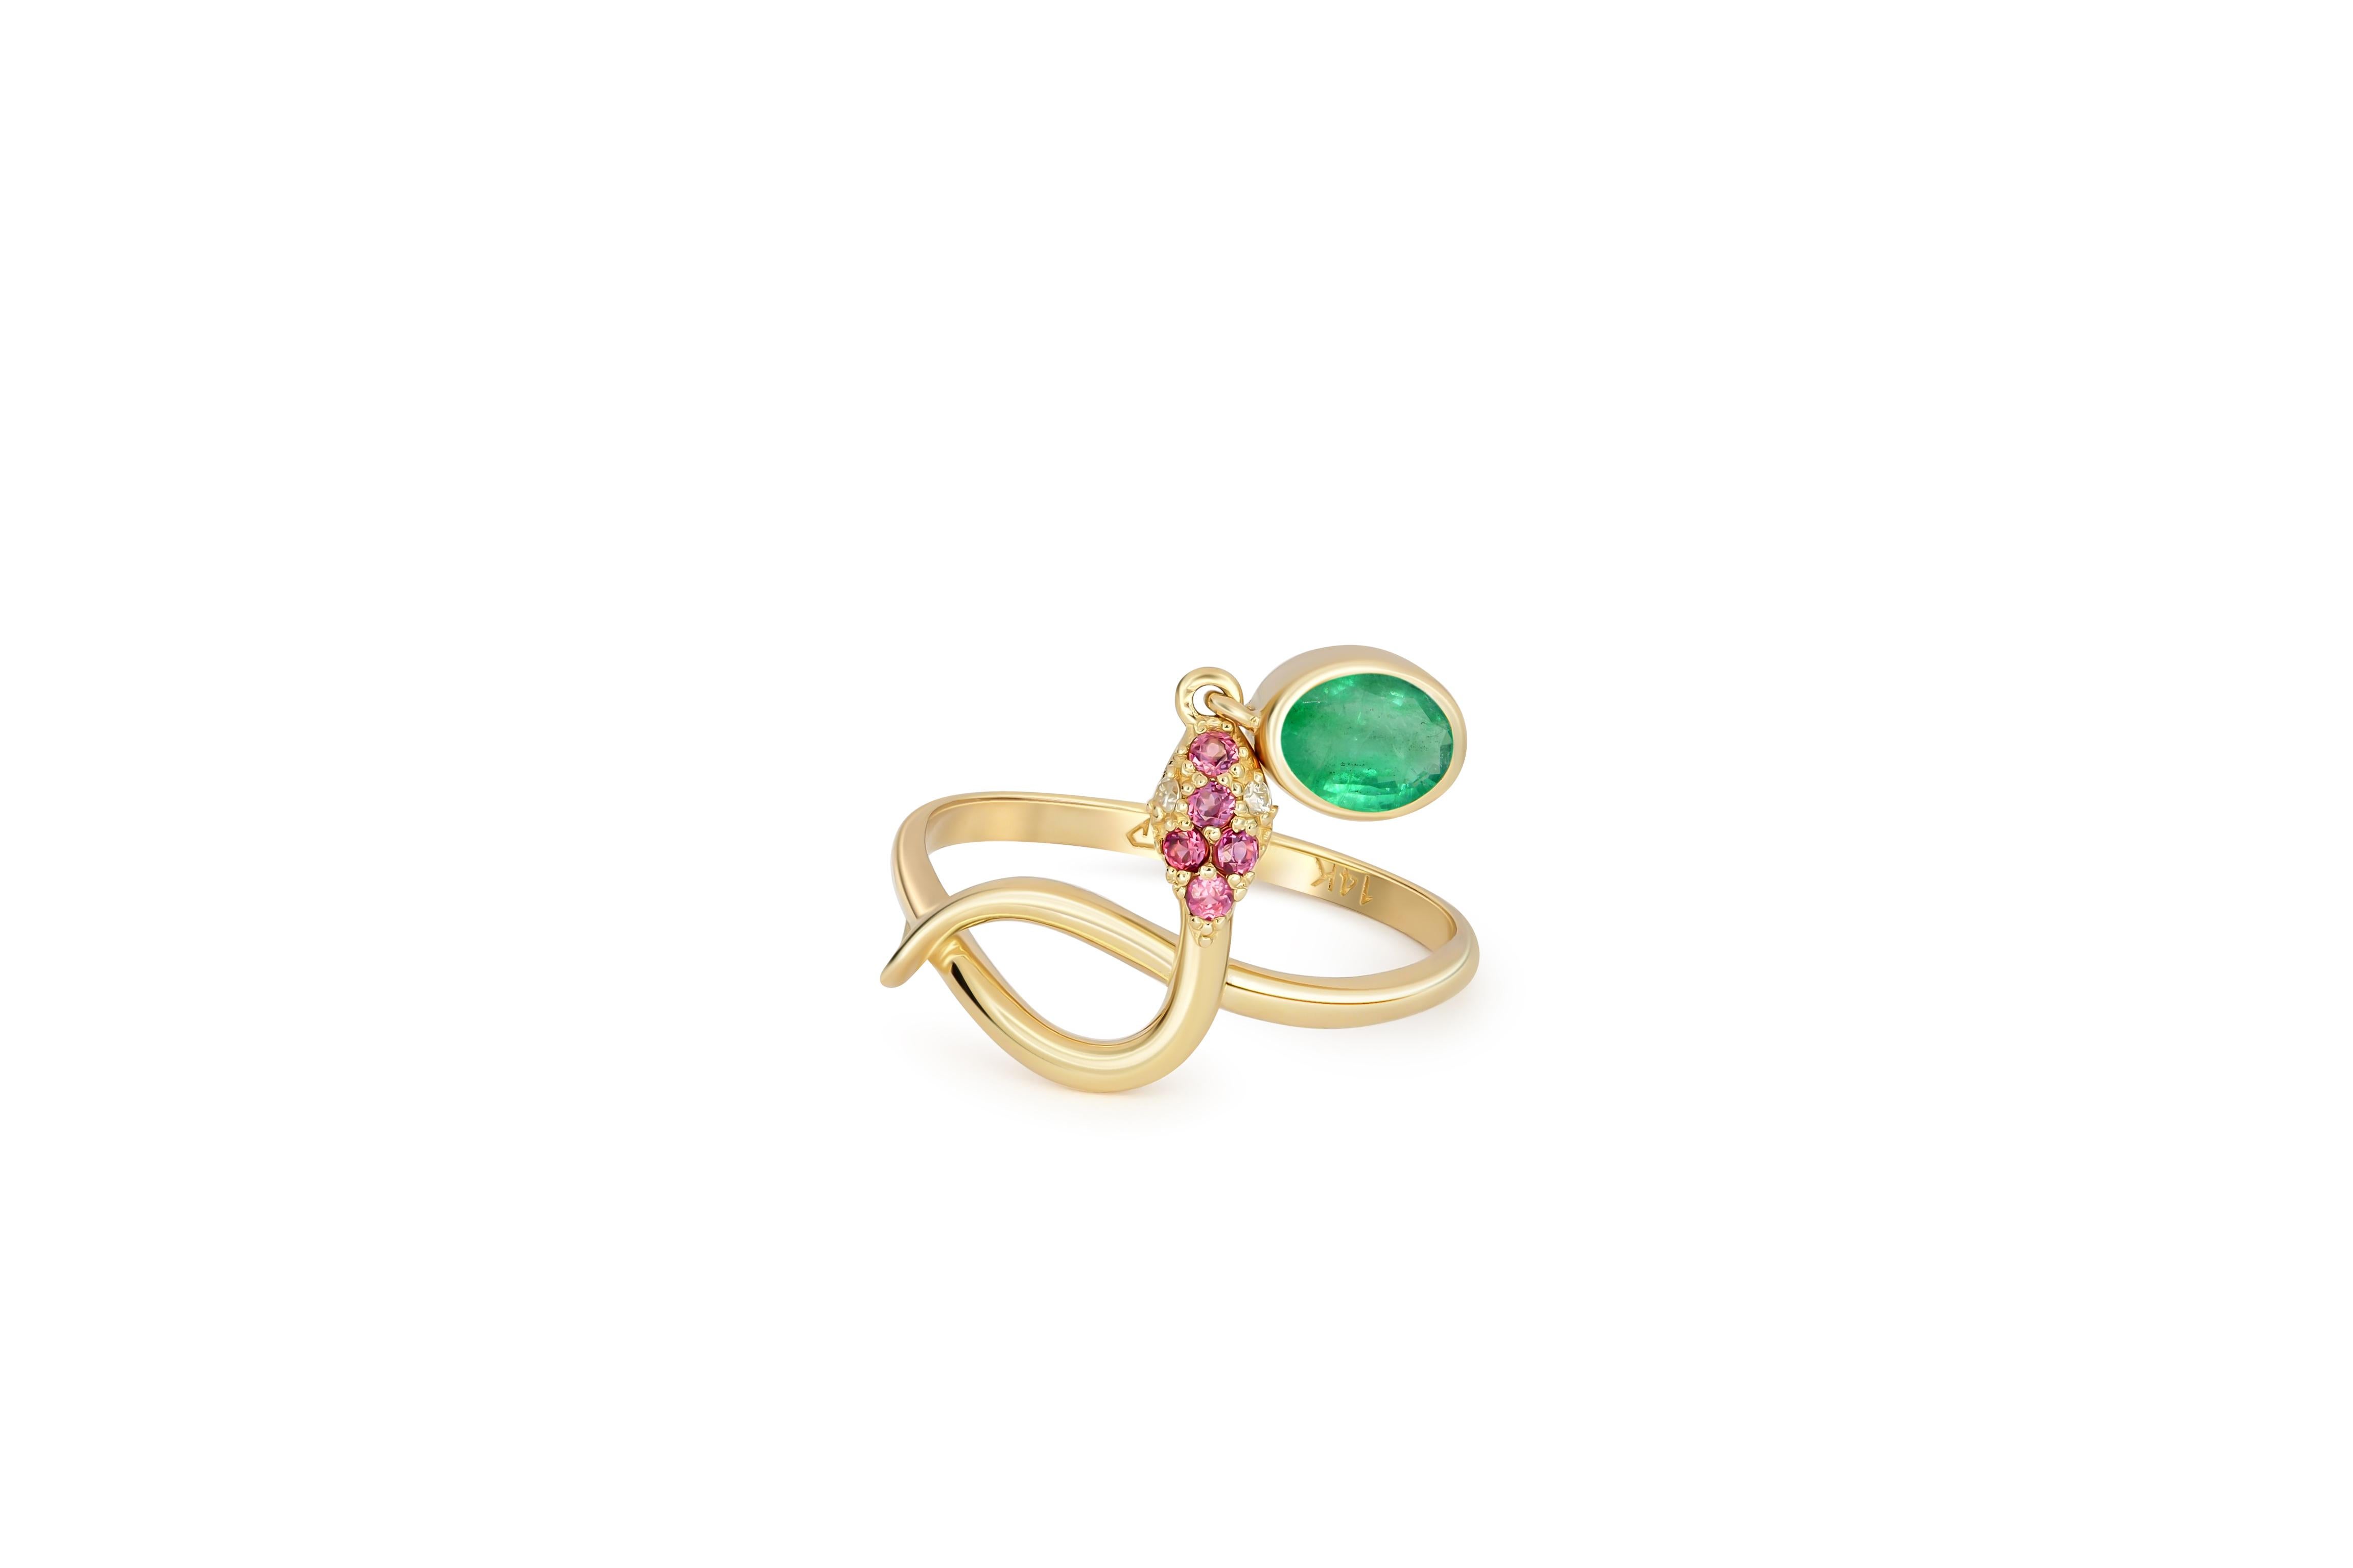 Snake ring with Emerald. 
Emerald gold ring. Snake gold ring. Genuine Emerald ring. Oval Emerald ring. May birthstone ring.

Metal: 14k gold.
Weight: 2.25 g. depends from size.

Gemstones:
Emerald: color - green
Oval cut, 0.8 ct. approx
Clarity: